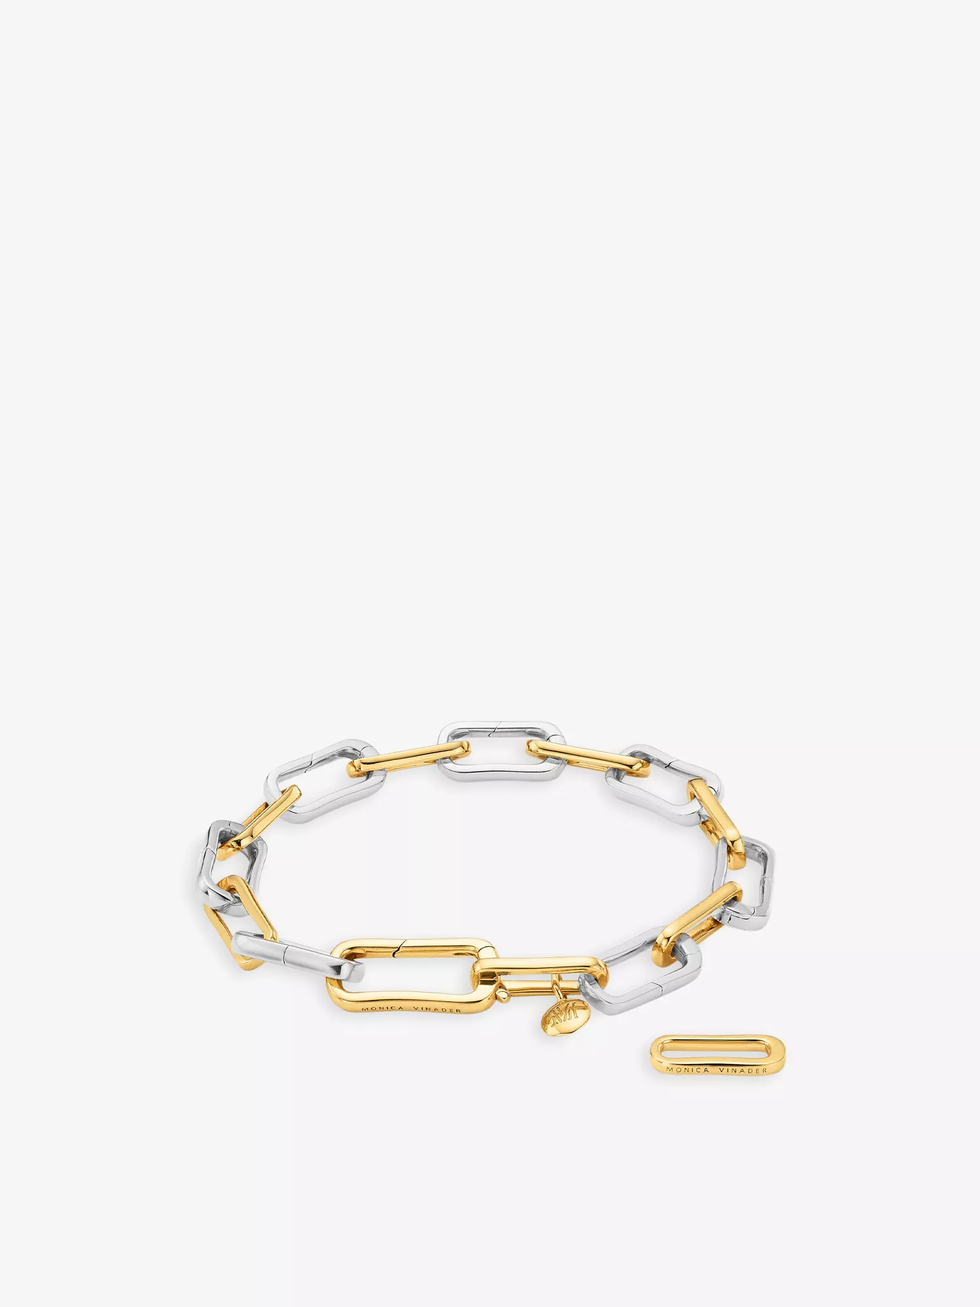 Alta Capture Mixed Metal recycled 18ct yellow gold-plated sterling silver and sterling silver bracelet